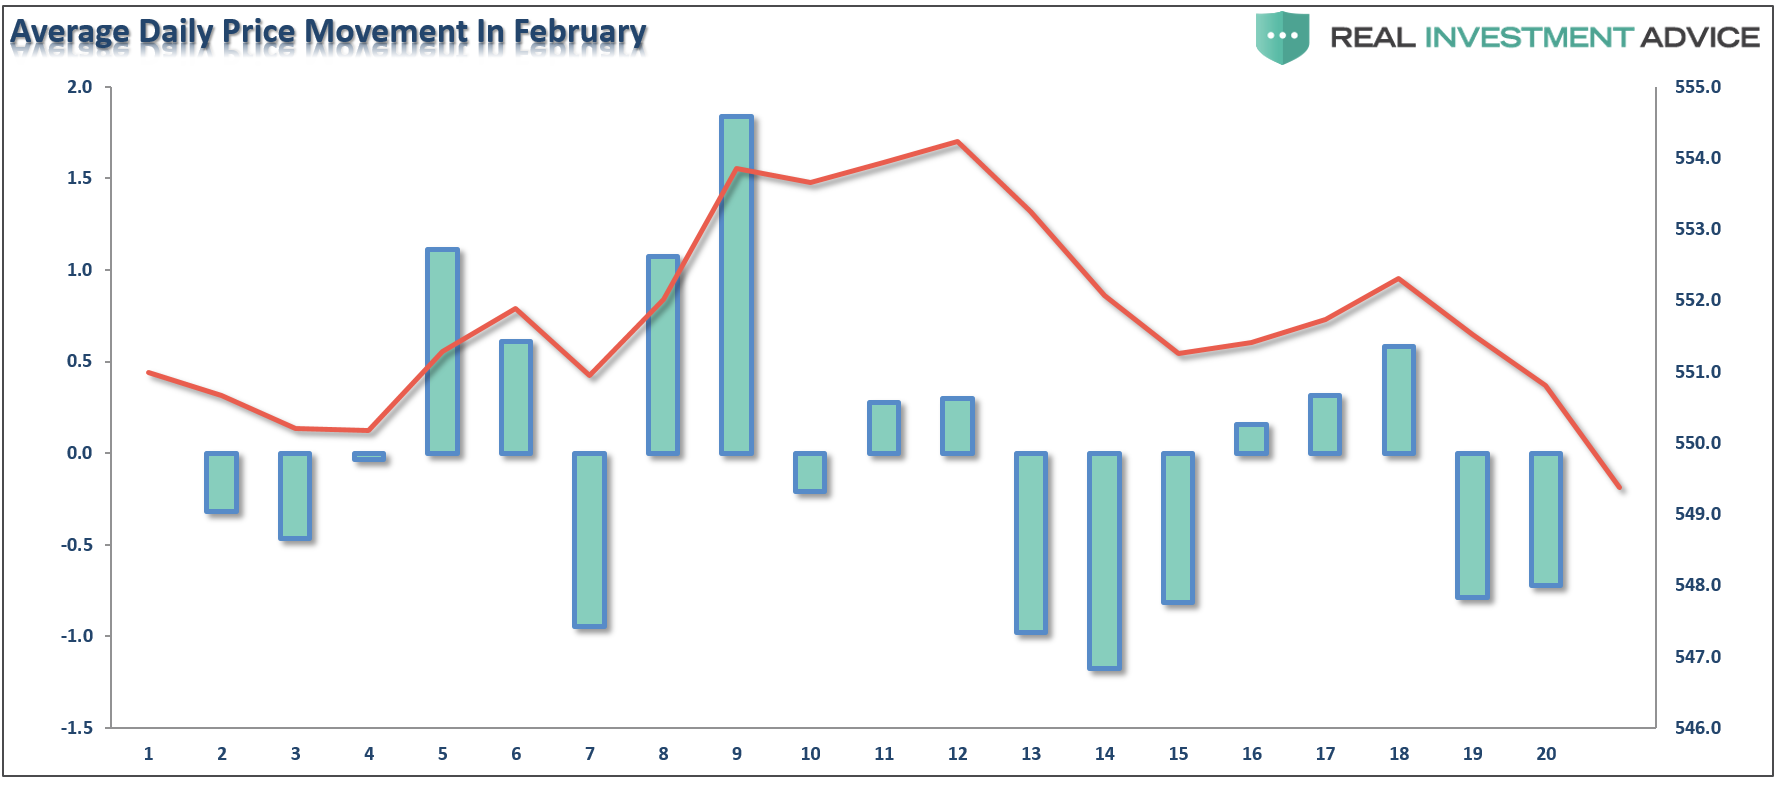 Average Daily Price Movement in February